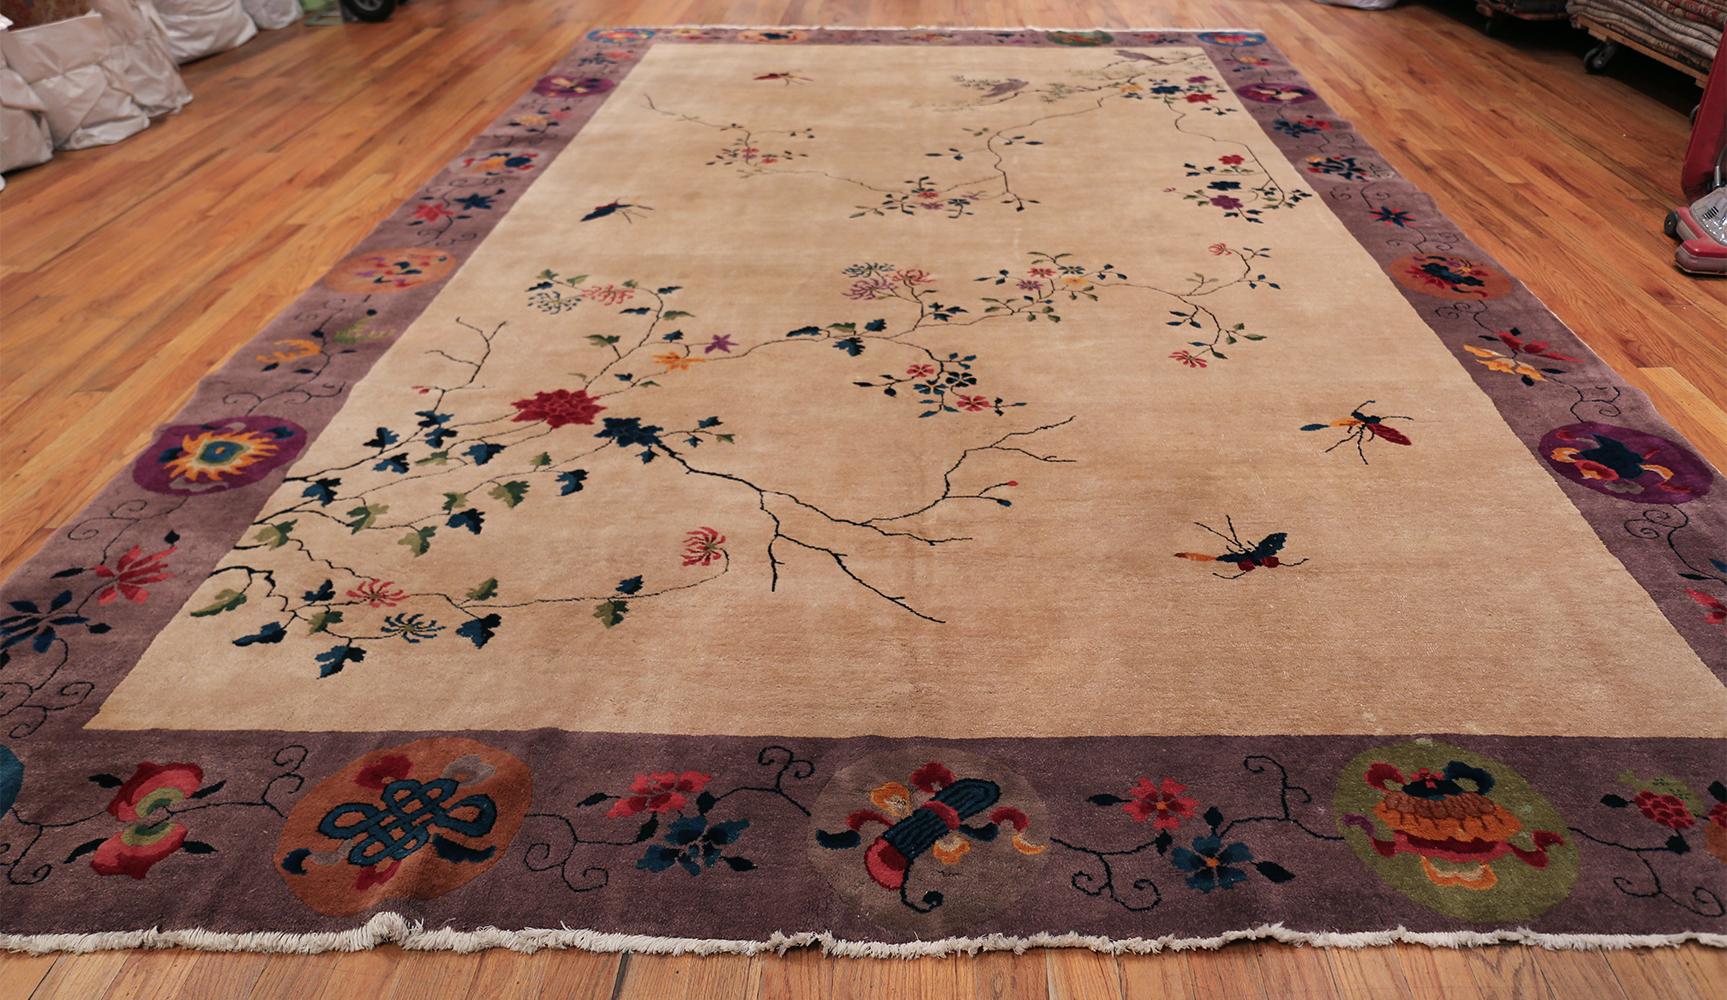 A beautiful and extremely artistic large antique Art Deco Chinese rug, country of origin / rug type: China, date circa 1920. Size: 10 ft 2 in x 15 ft 3 in (3.1 m x 4.65 m)

This stunning Art Deco rug features a beautiful garden and all of the